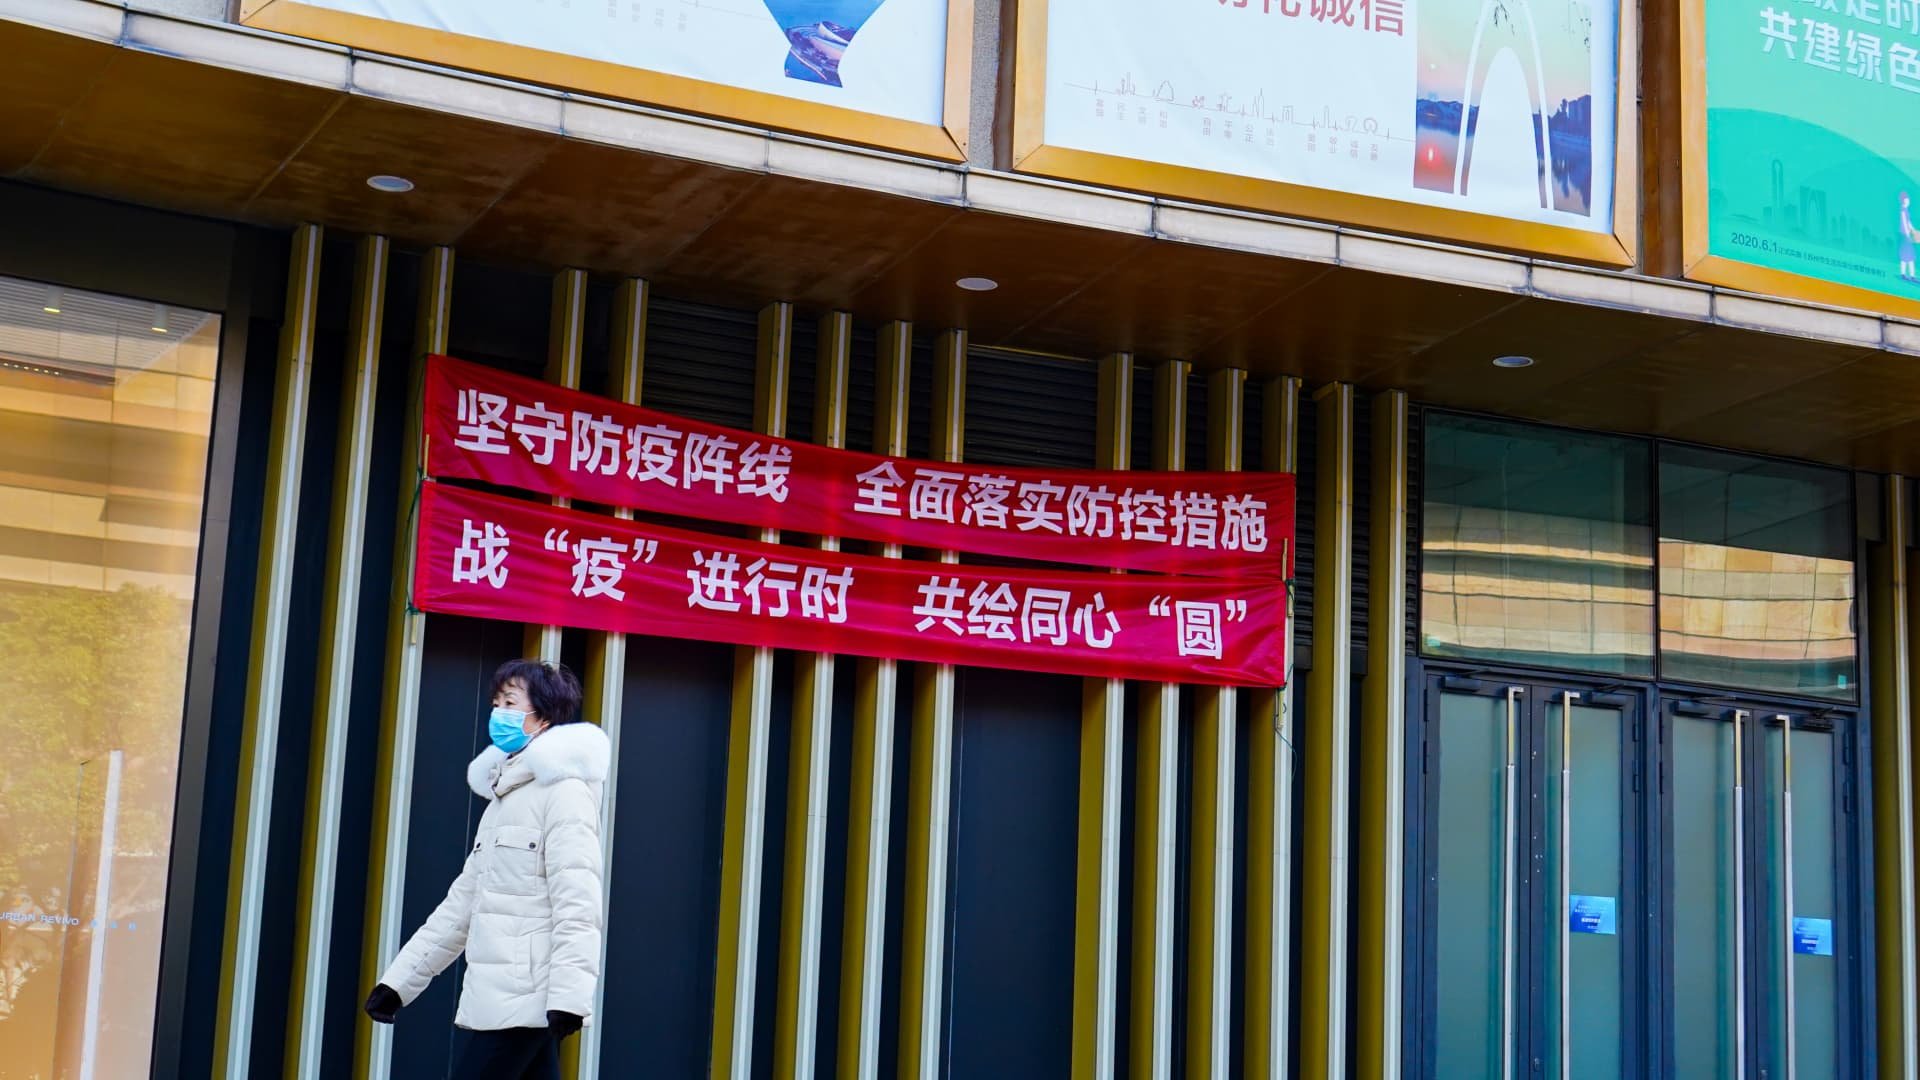 China's Covid lockdowns are hitting more than just Shanghai and Beijing